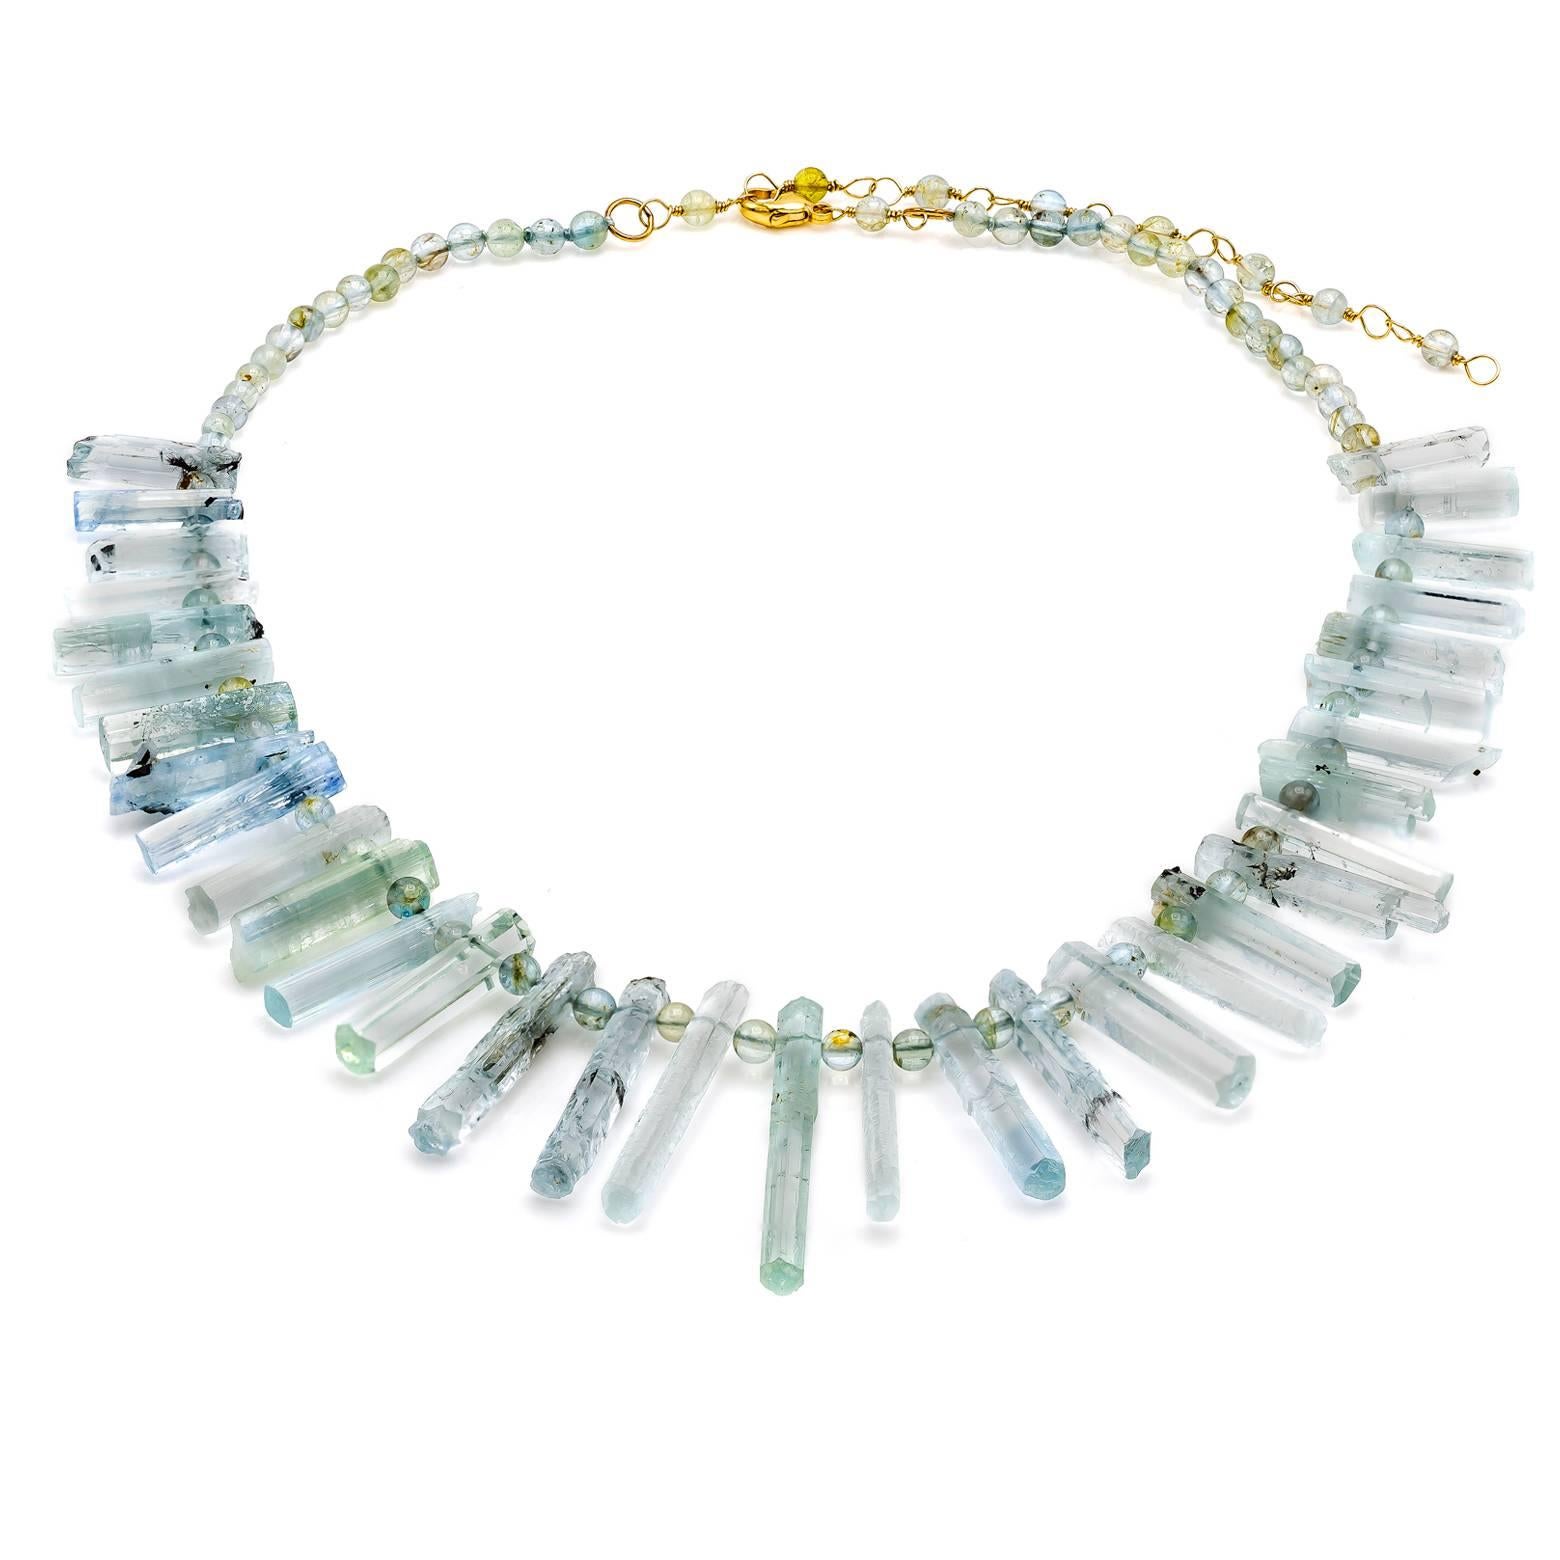 A beautiful natural aquamarine necklace that tapers in length as is adorned with round beads that compliment the raw uncut style of the long hexagonal spears. Delicate hues of light blue and teal in this aquamarine necklace sparkle as the natural